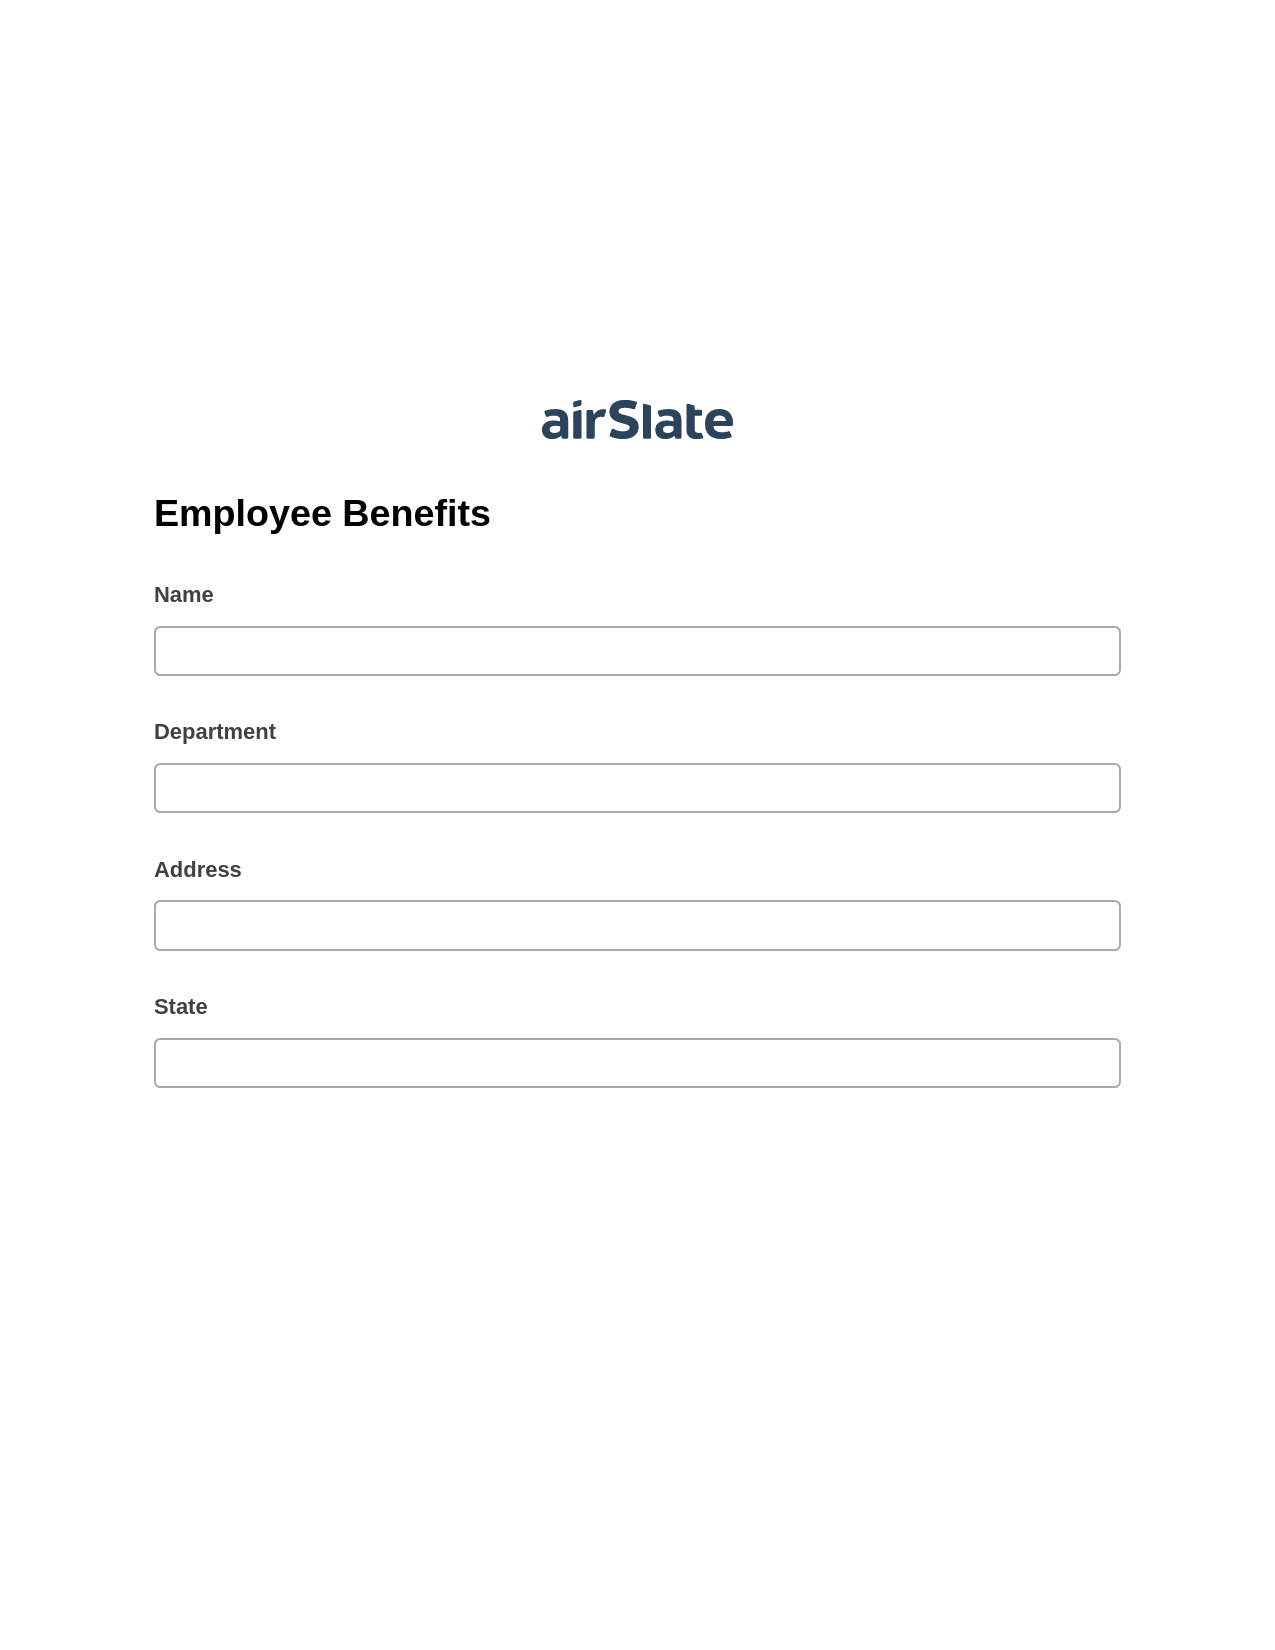 Employee Benefits Pre-fill from another Slate Bot, Google Cloud Print Bot, Export to Excel 365 Bot